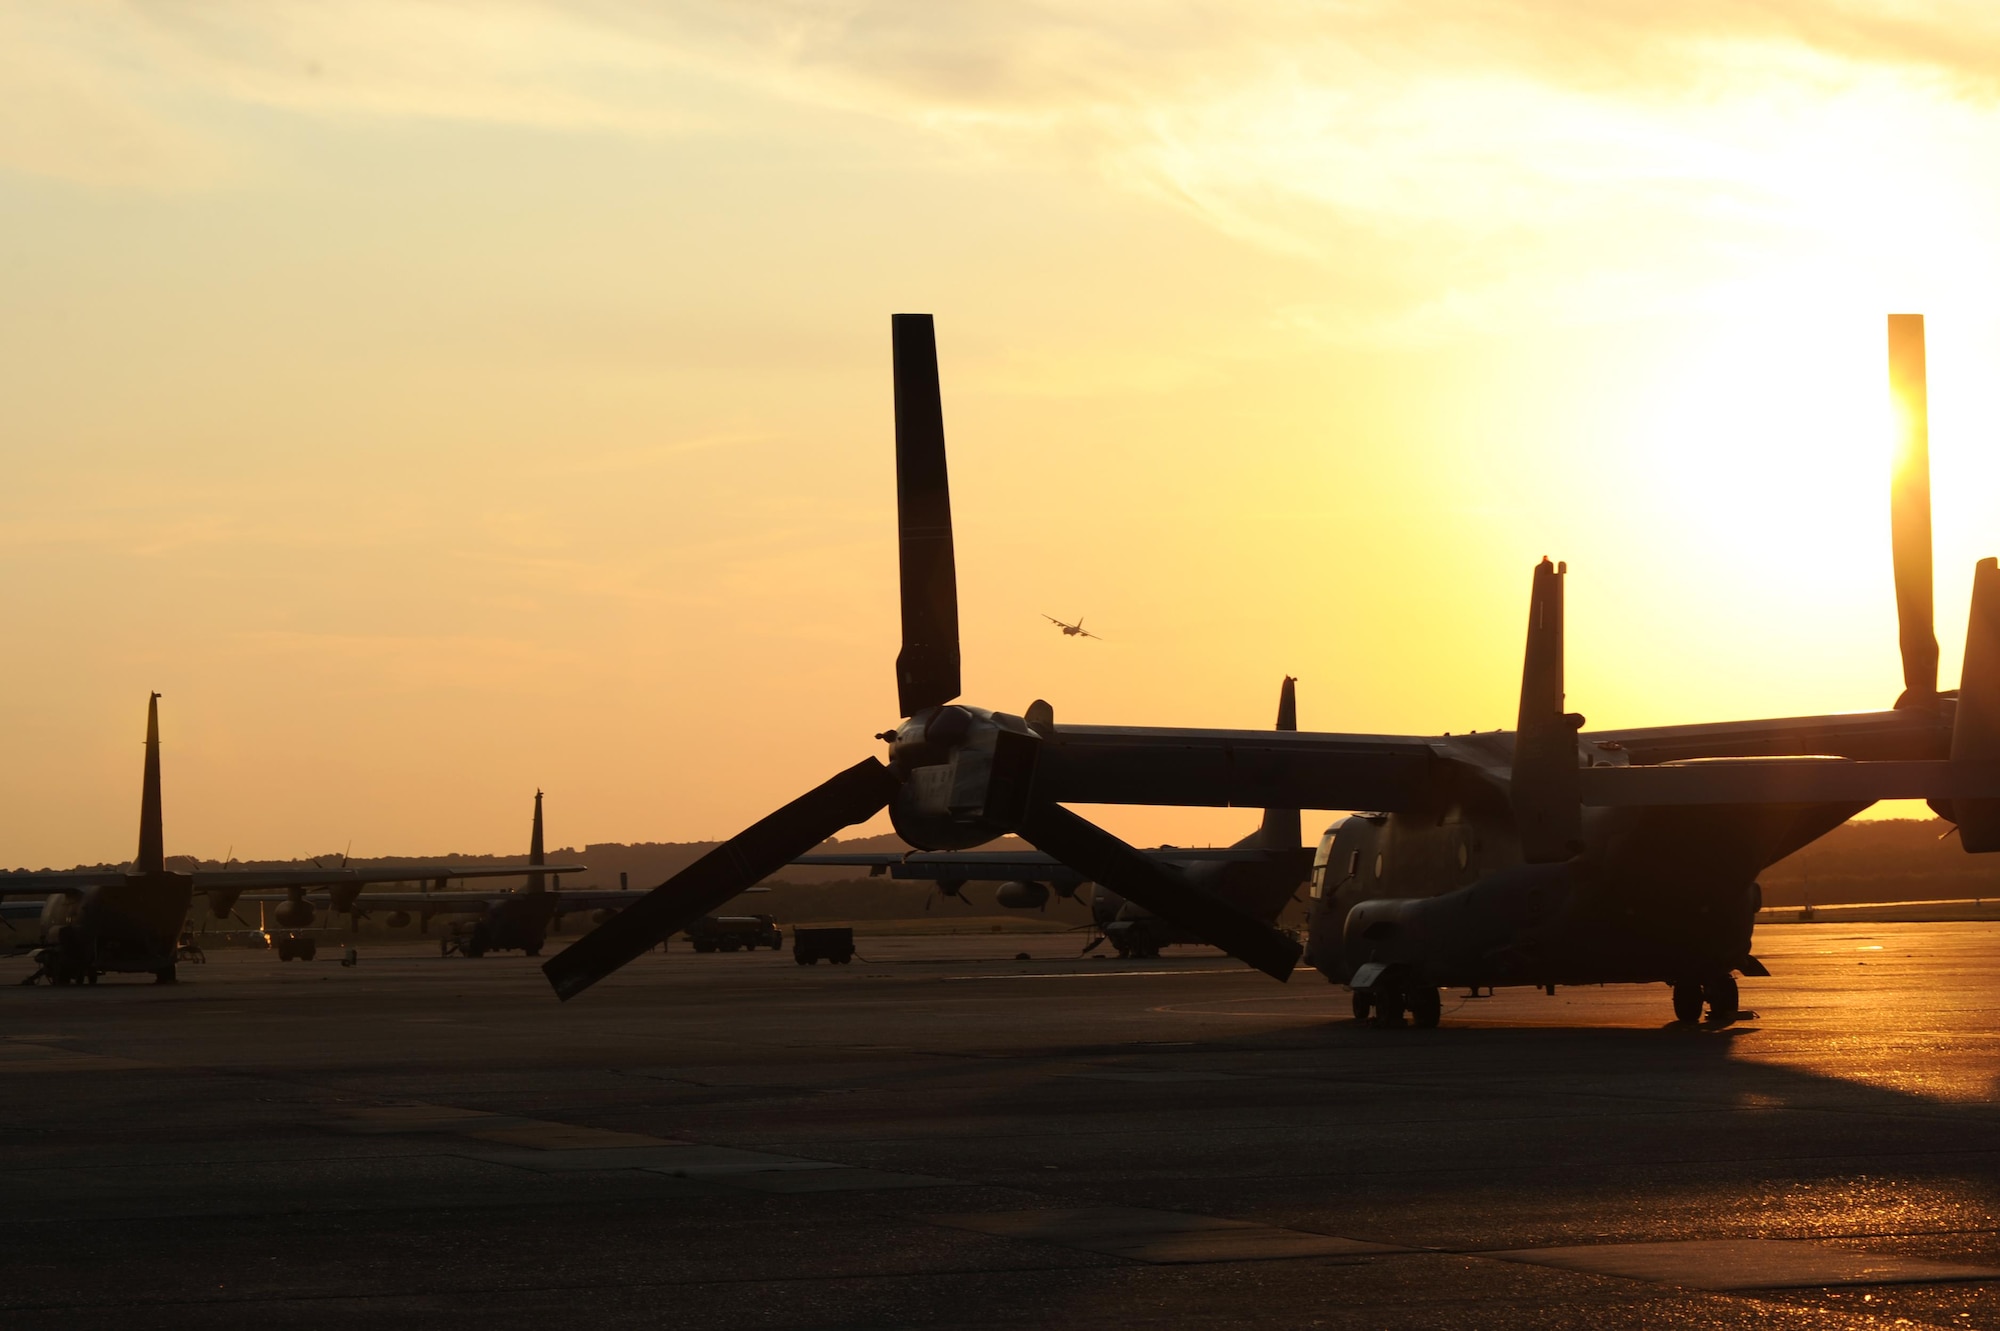 A CV-22 Osprey, along with other aircraft assigned to Hurlburt Field, Fla., is parked on the flightline after landing Sept. 9, 2017, at Little Rock Air Force Base, Ark. The aircraft is capable of extremely accurate navigation due to the fully integrated navigation systems with dual inertial navigation systems and global positioning system. (U.S. Air Force photo by Airman 1st Class Grace Nichols)